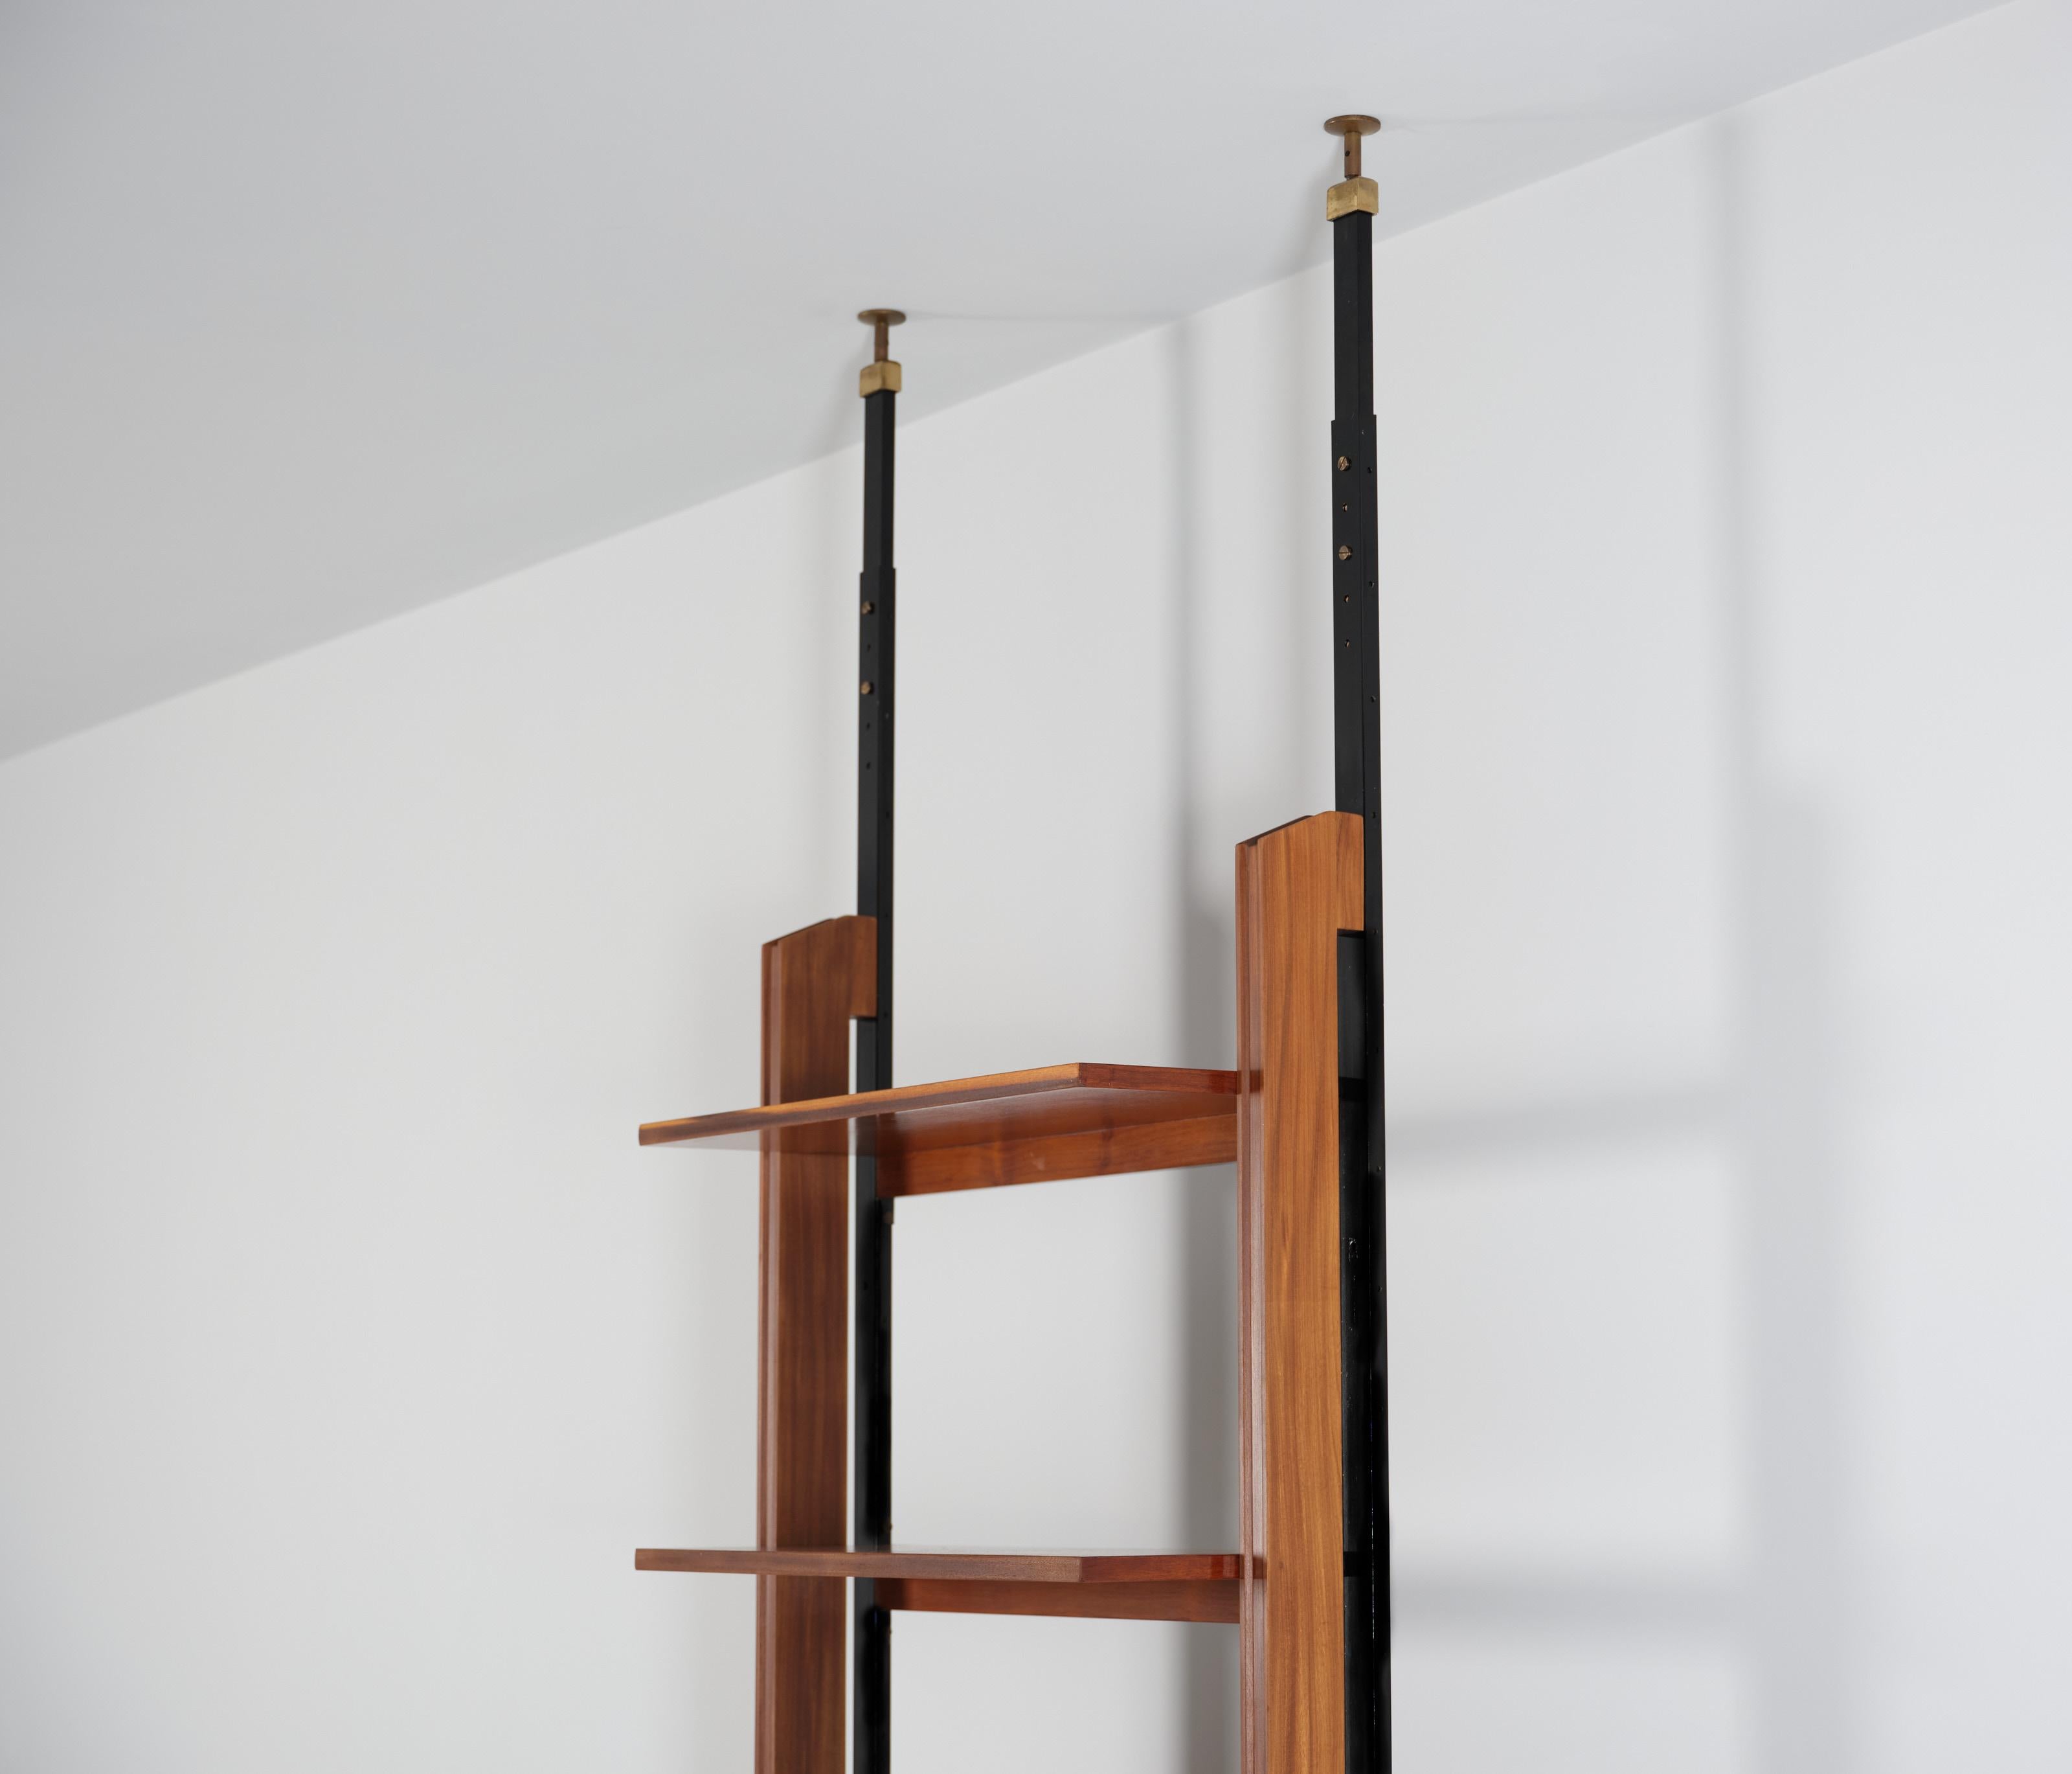 Crafted from the finest teak wood, this modular Wall Unit features a sophisticated system of pressure mounting between the floor and ceiling, ensuring stability and adaptability to any space. The combination of teak wood and iron creates a